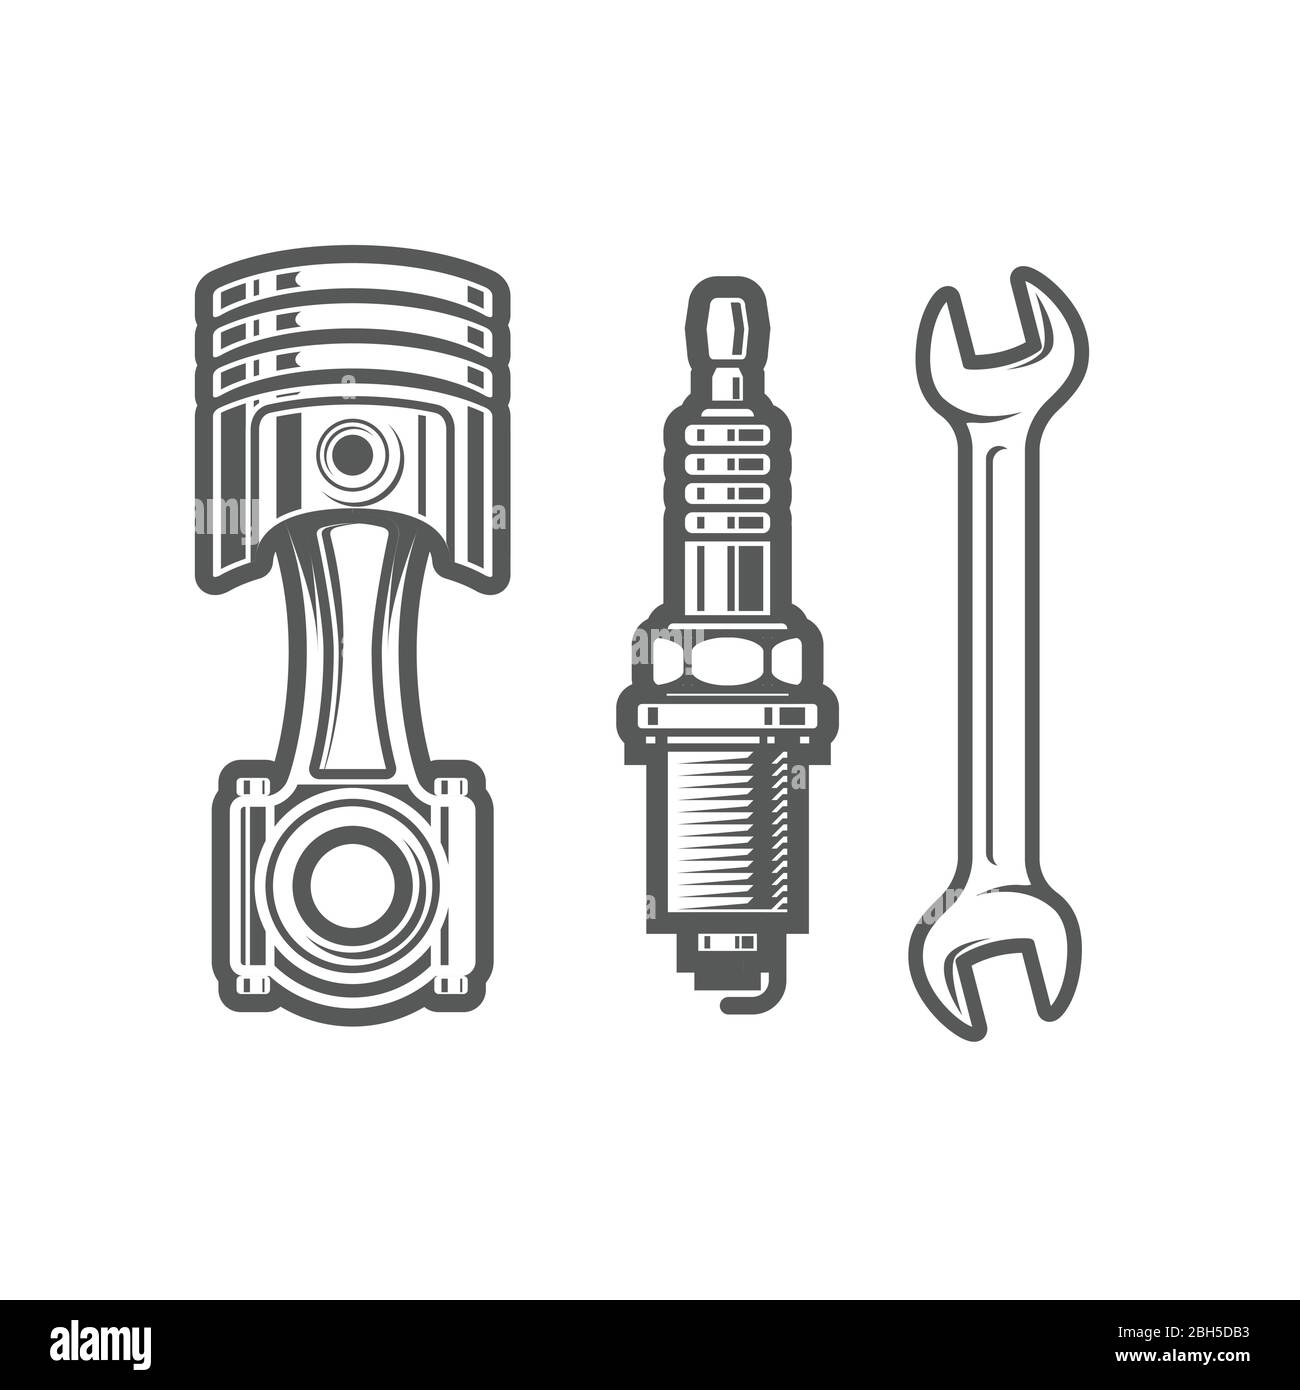 Car service station sign, spark plug, piston and spanner icons, maintenance shop logo Stock Vector